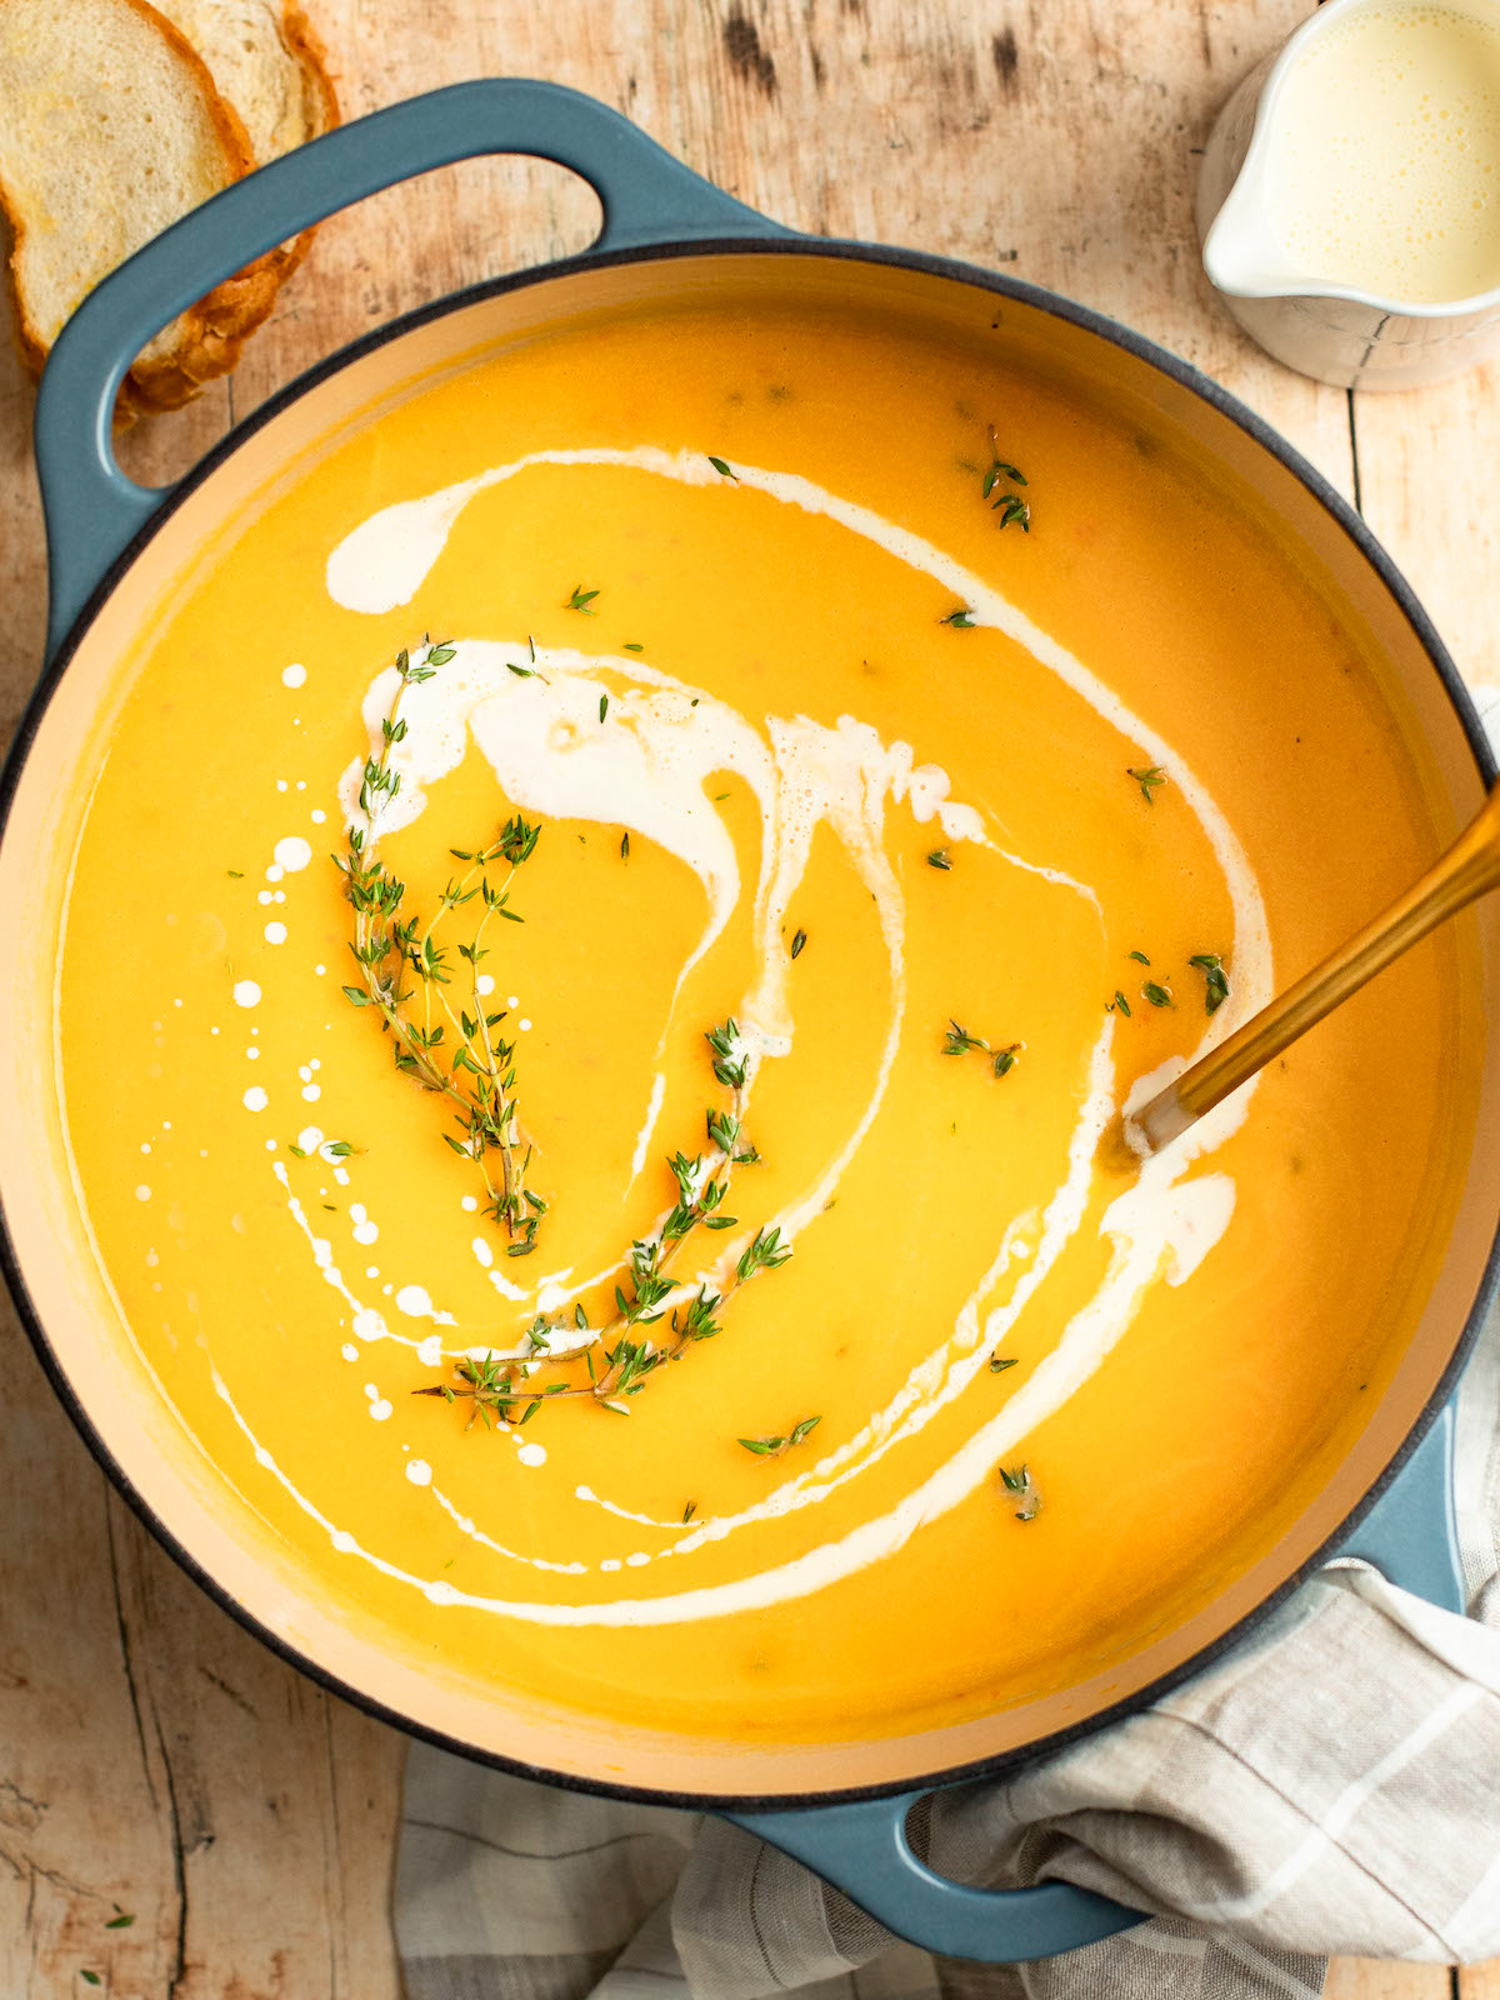 How to freeze soup (and reheat) - Fuss Free Flavours